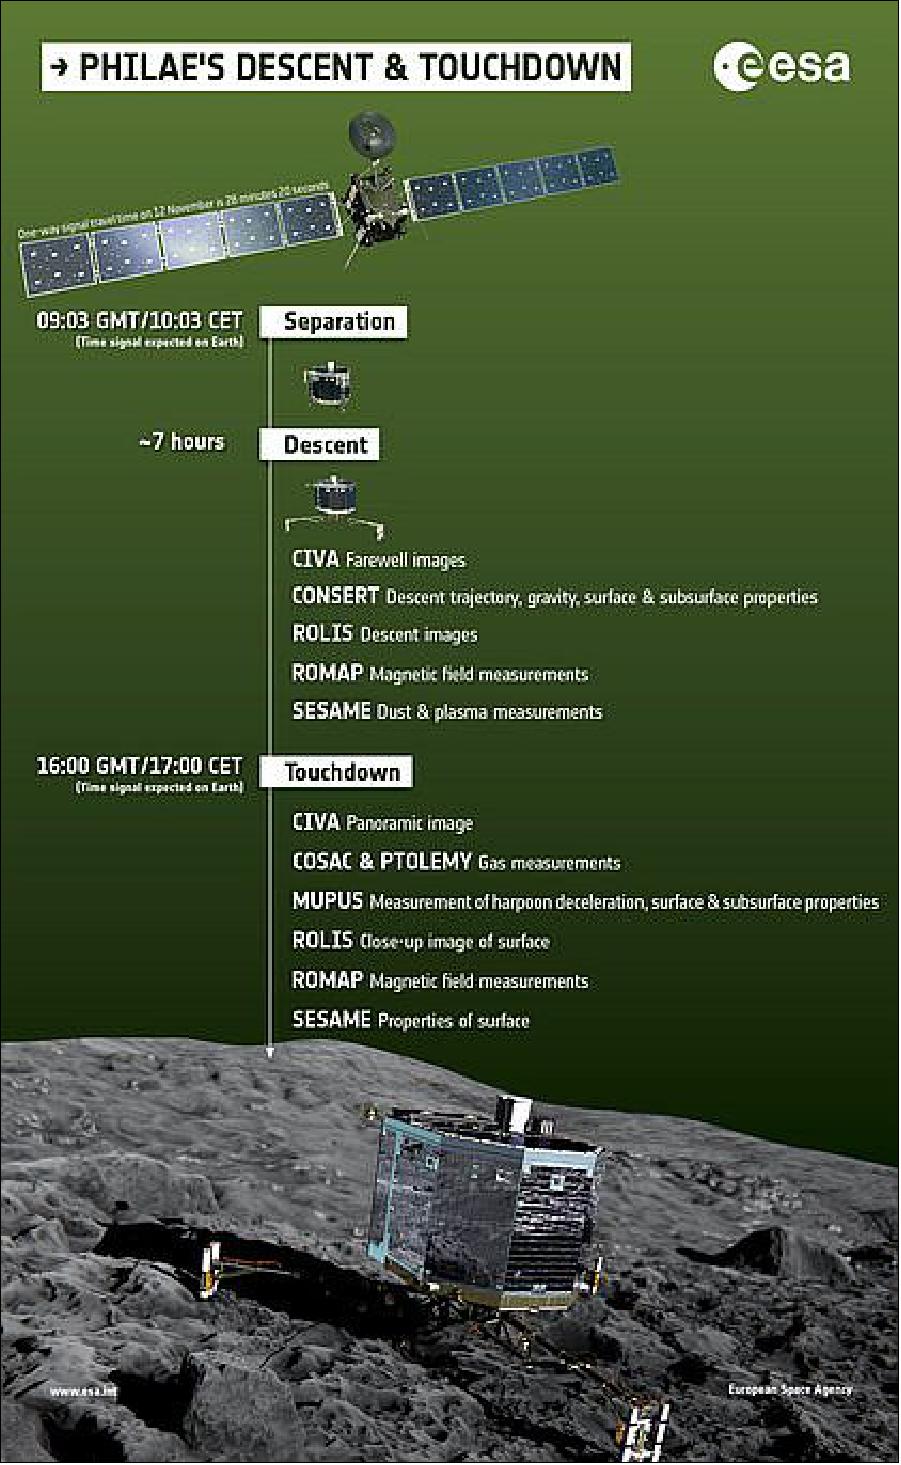 Figure 157: Infographic to summarize the measurements carried out by Rosetta’s lander, Philae, during its seven-hour descent to Comet 67P/Churyumov–Gerasimenko and immediately after touchdown (image credit: ESA/ATG medialab)